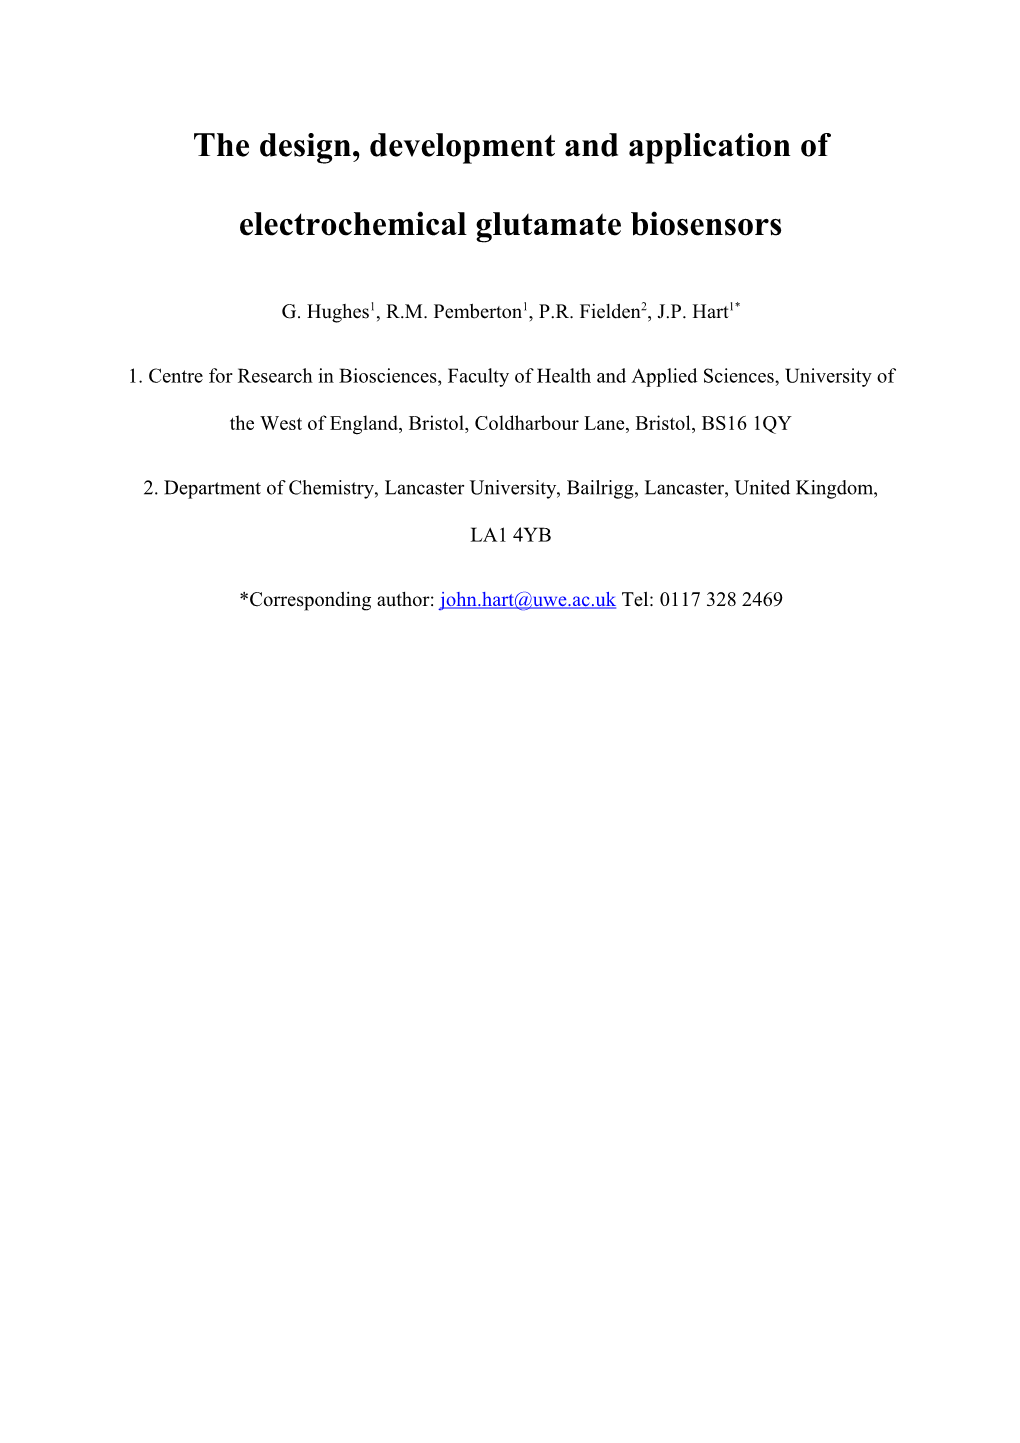 The Design, Development and Application of Electrochemical Glutamate Biosensors